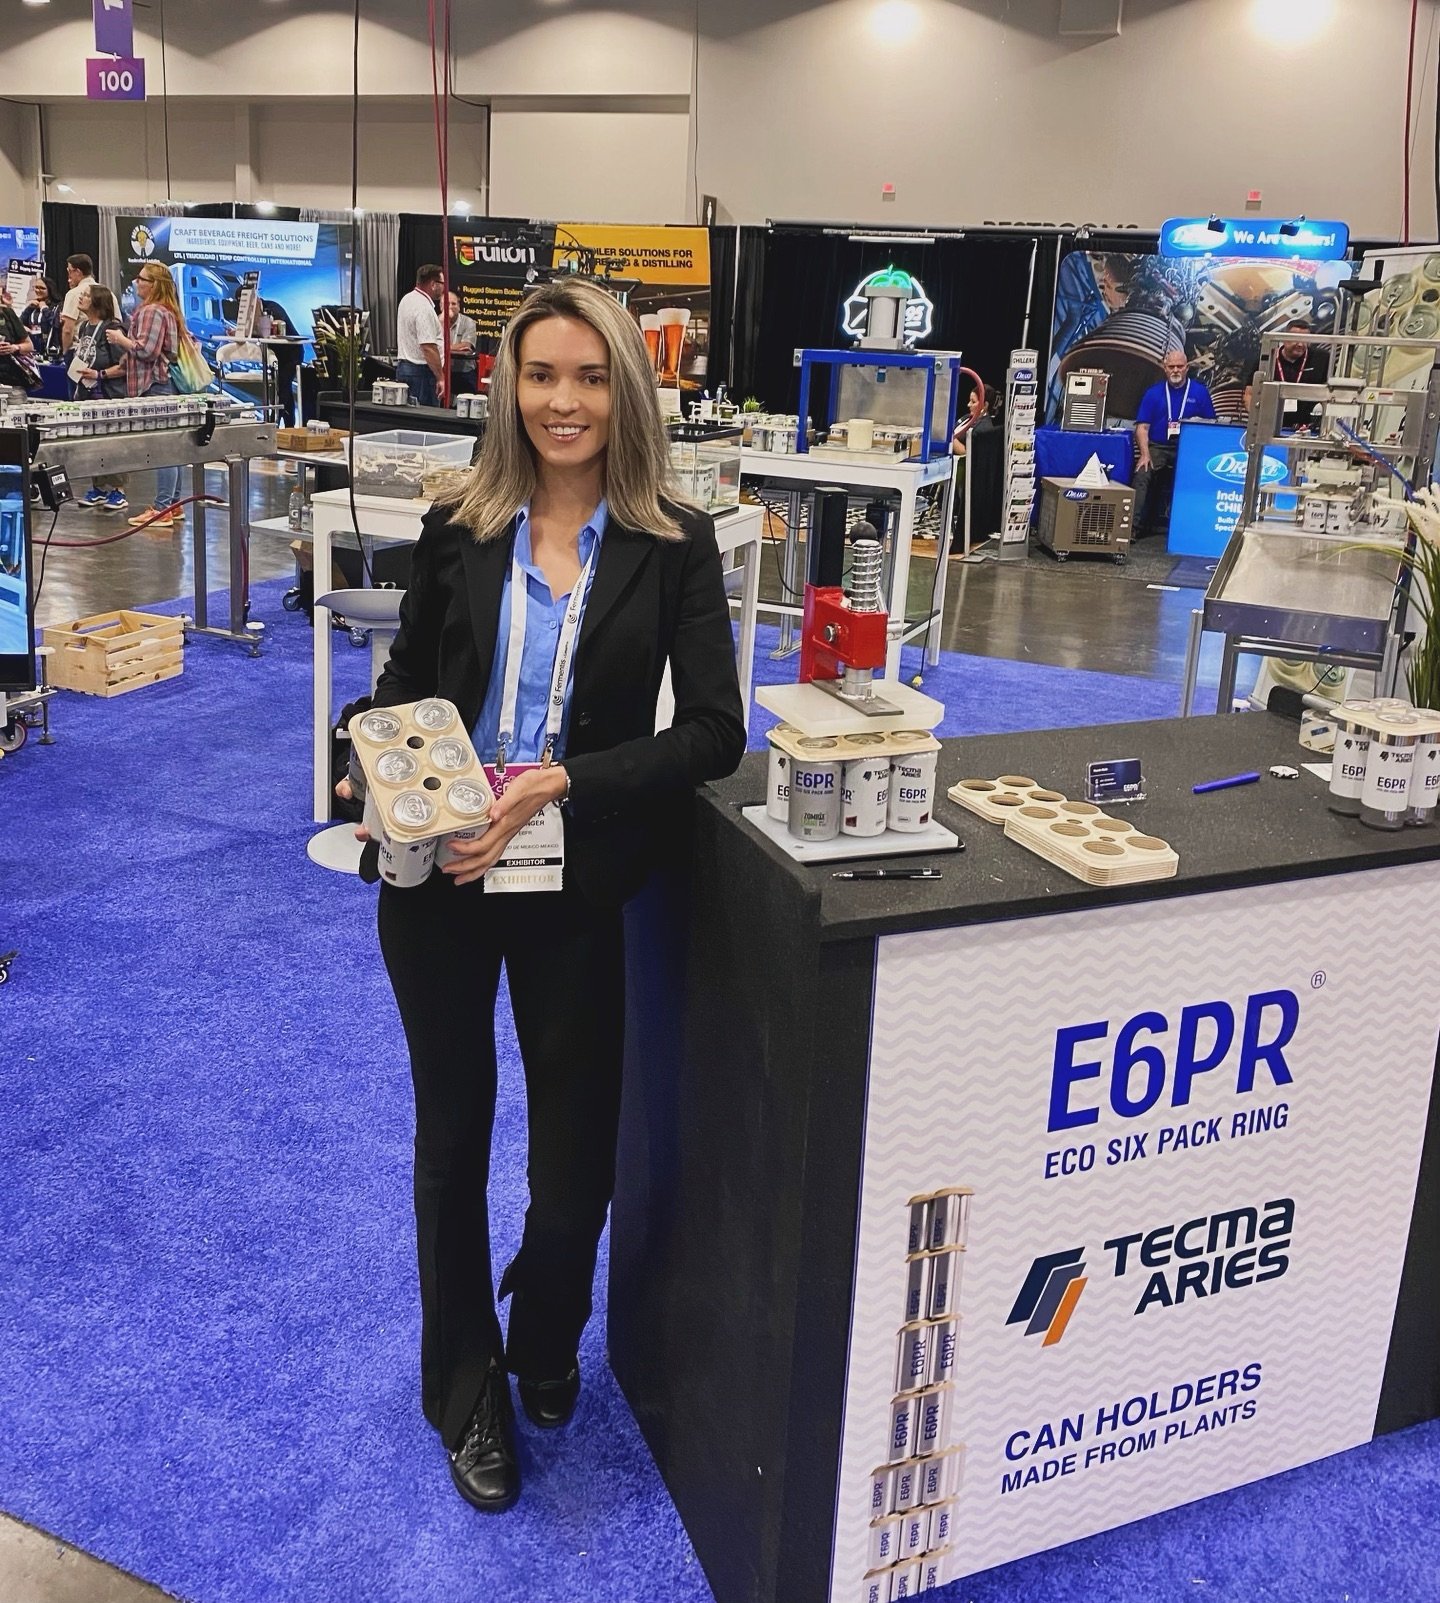 Serving up sustainability at the Craft Brewers Conference &amp; BrewExpo America with E6PR&rsquo;s eco-friendly six-pack rings. Cheers to innovation that&rsquo;s good for the planet! 🌿🍻
📍Las Vegas, NV 
.
.
#CraftBrewersCon #SustainableBrewing #E6P